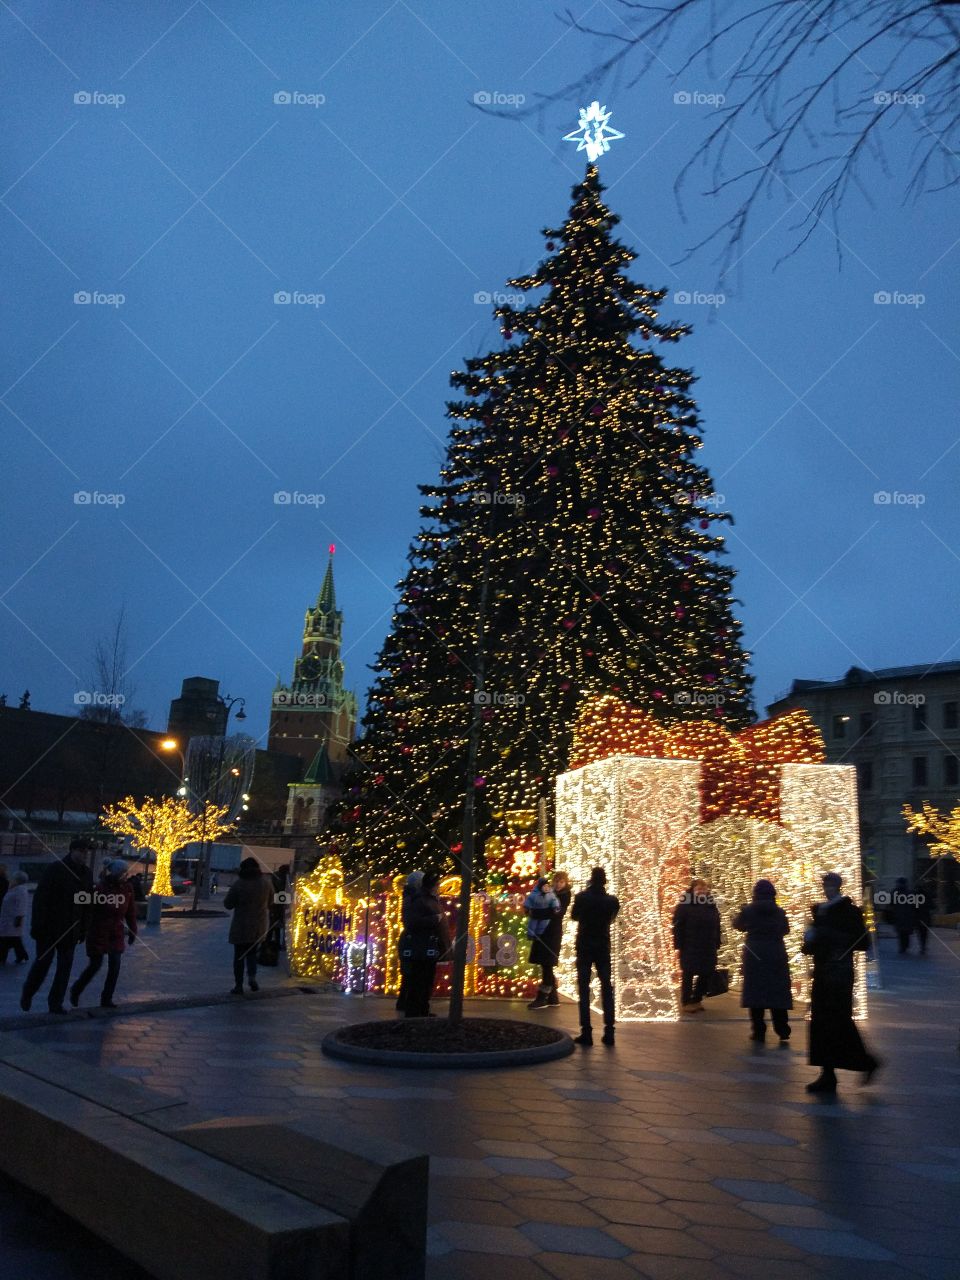 Christmas Tree, Architecture, Street, Travel, No Person